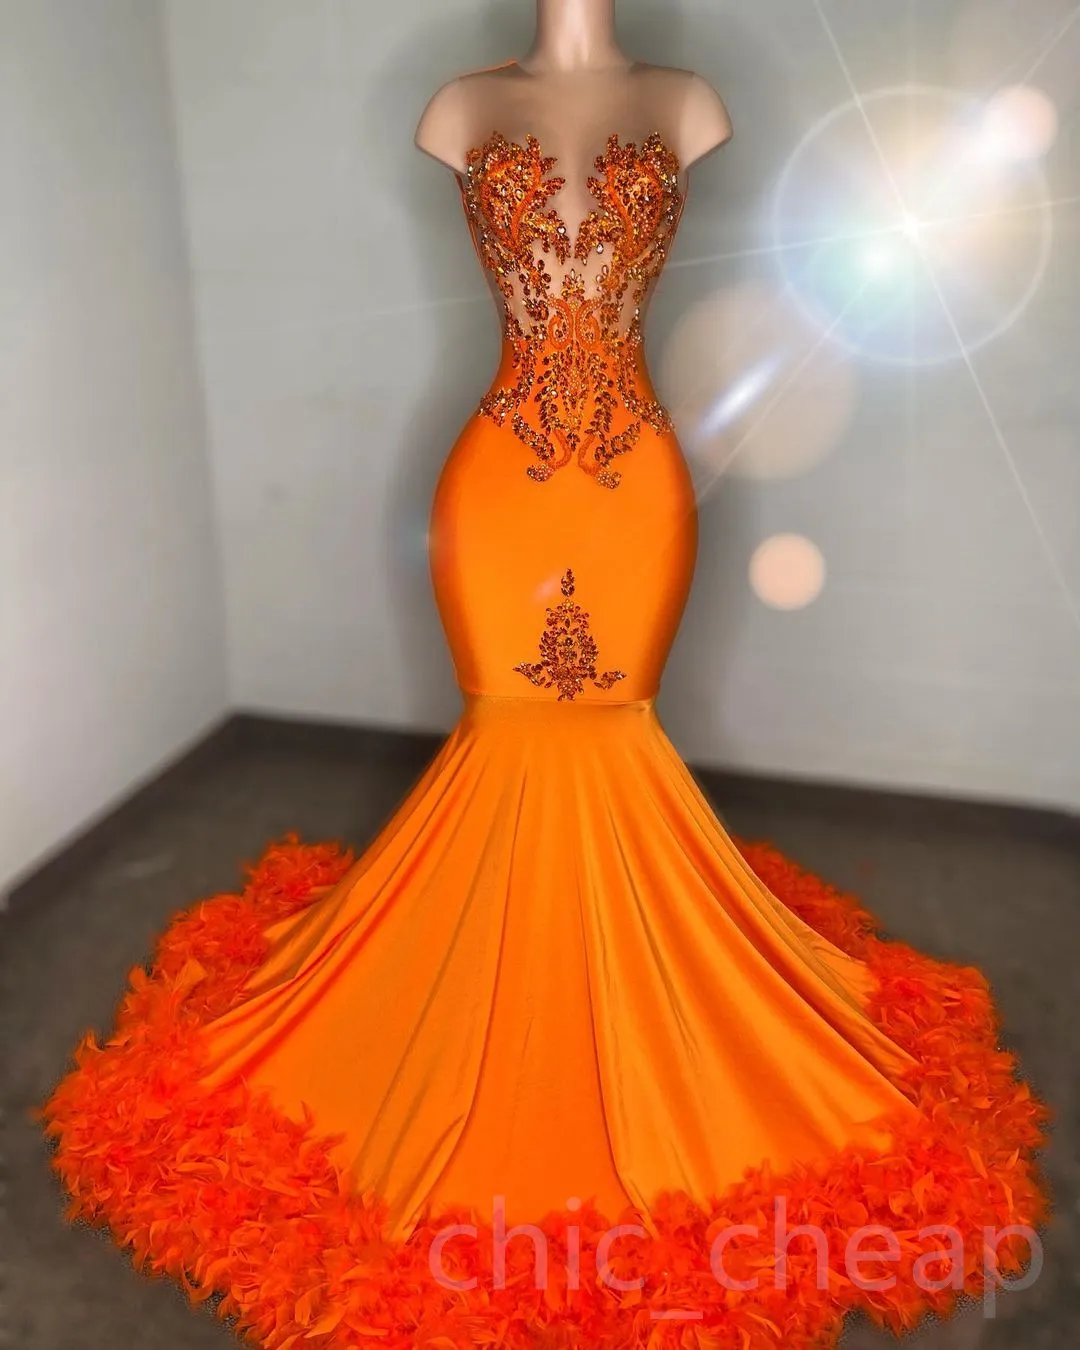 2023 Arabic Aso Ebi Orange Mermaid Prom Dress Beaded Crystals Feather Evening Formal Party Second Reception Birthday Engagement Gowns Dresses Robe De Soiree